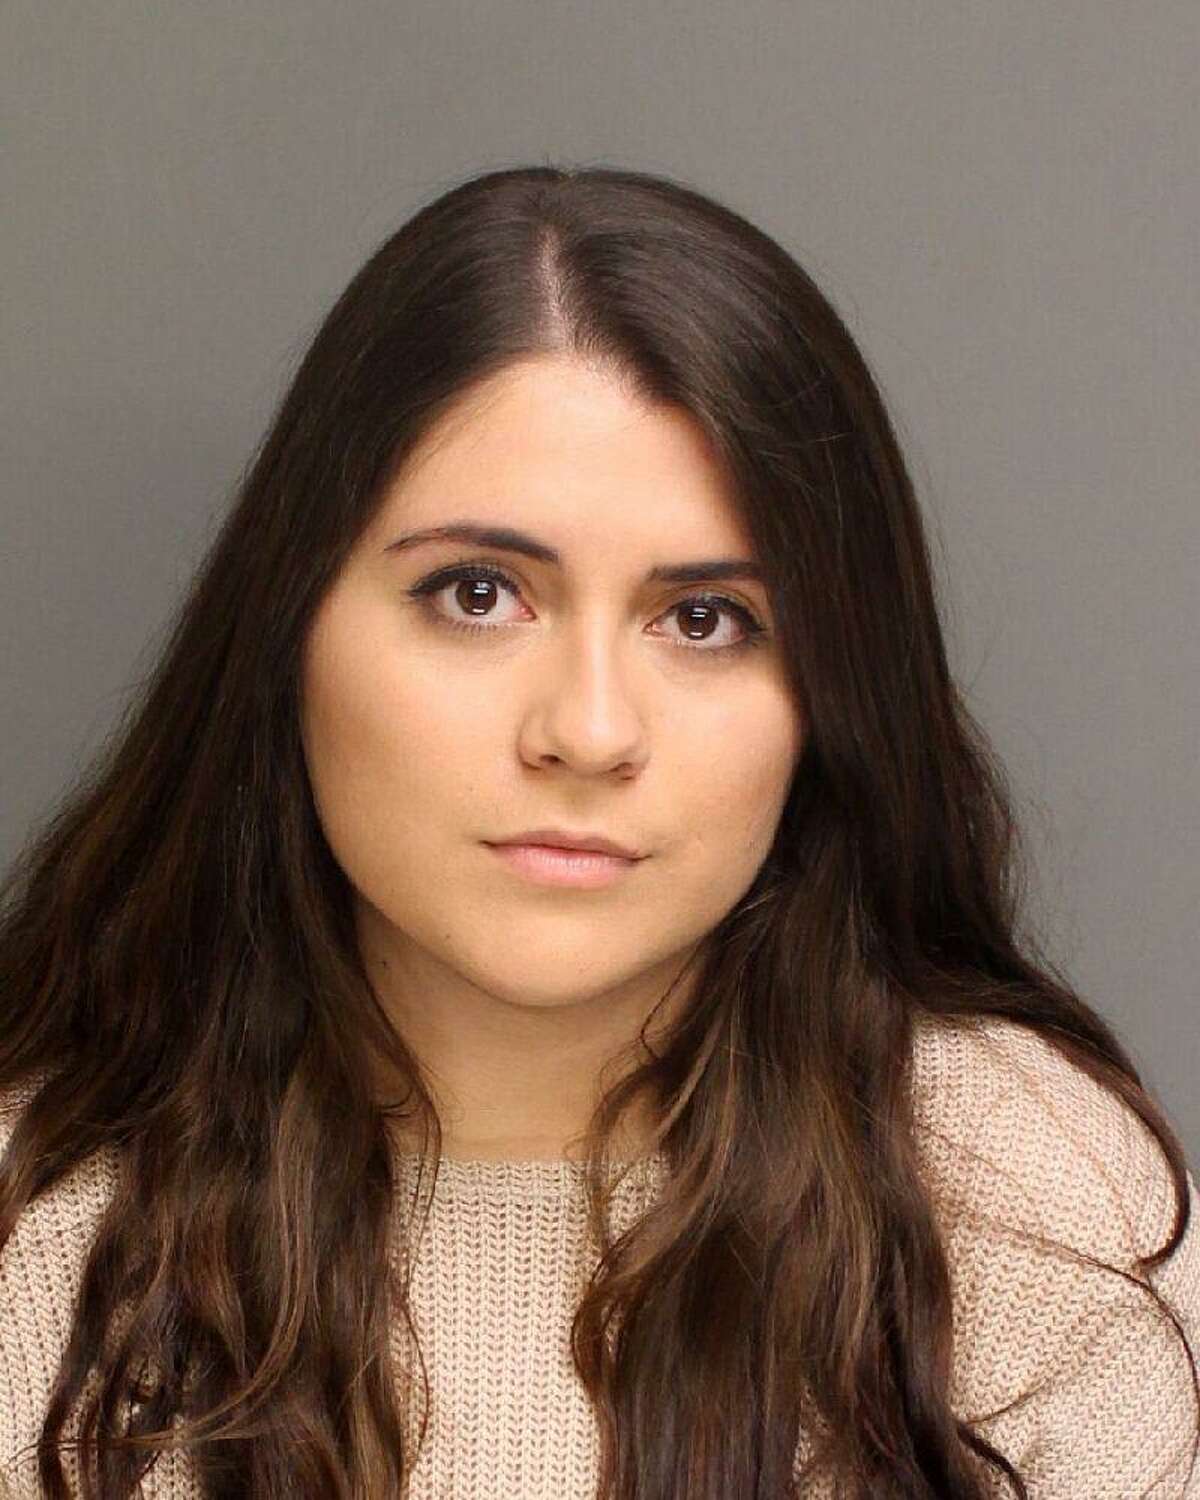 Police said 18-year-old Nikki Yovino, of South Setauket, N.Y., has been charged with second-degree falsely reporting an incident and tampering with or fabricating physical evidence.